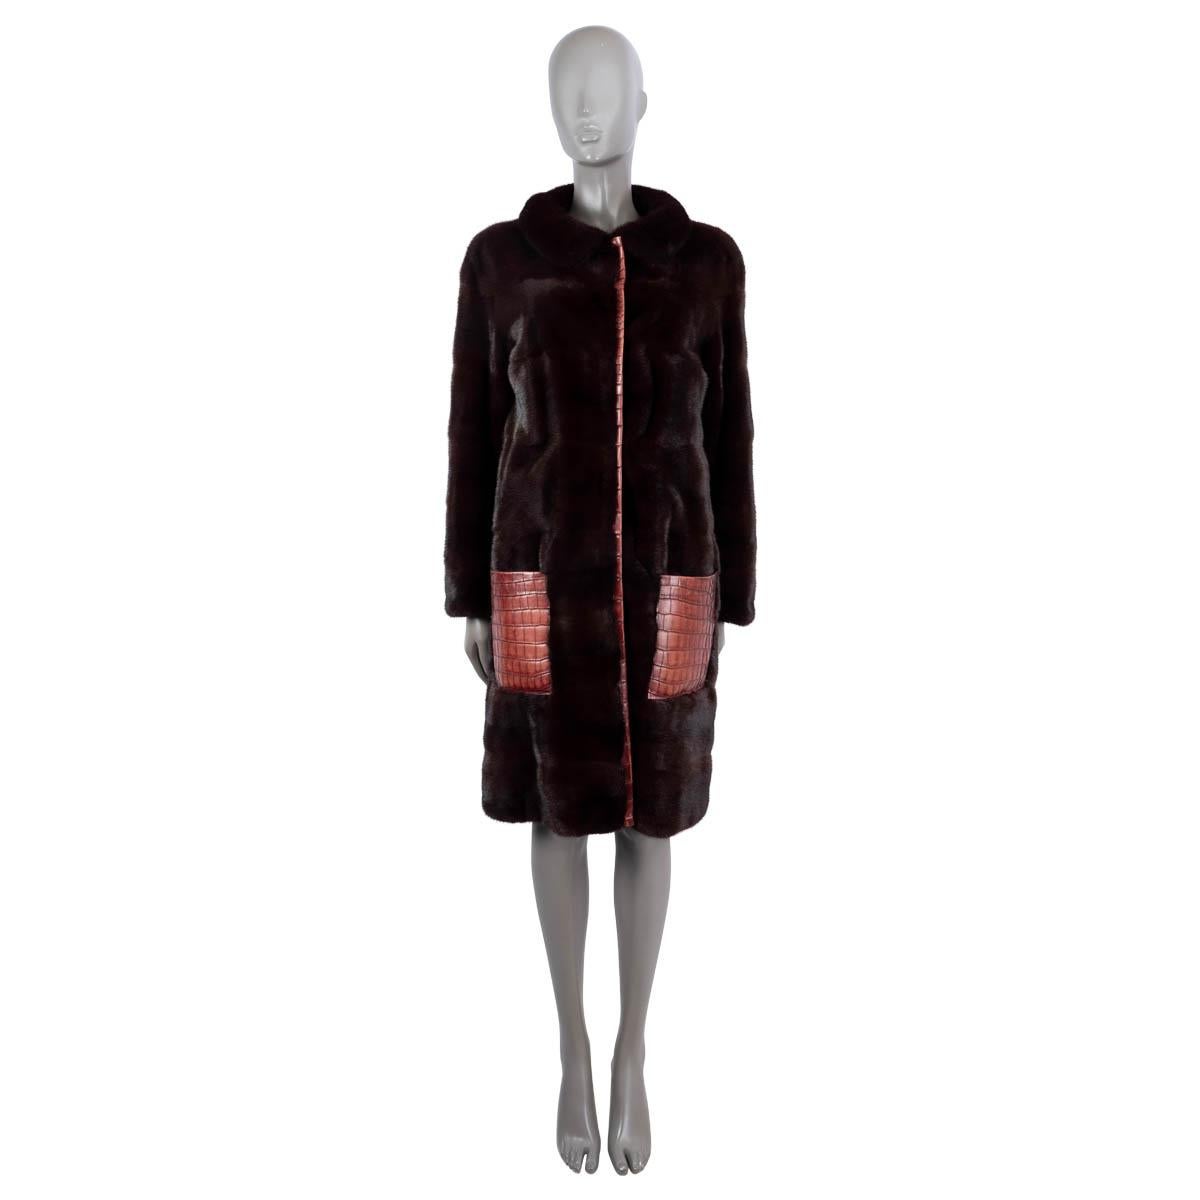 100% authentic Christian Dior coat in burgundy mink fur (100%). Features brick red crocodile trim and pockets. Closes with concealed hooks. Lined in silk (100%). Has been worn and is in excellent condition.

Retails for CHF 54'000 approx USD